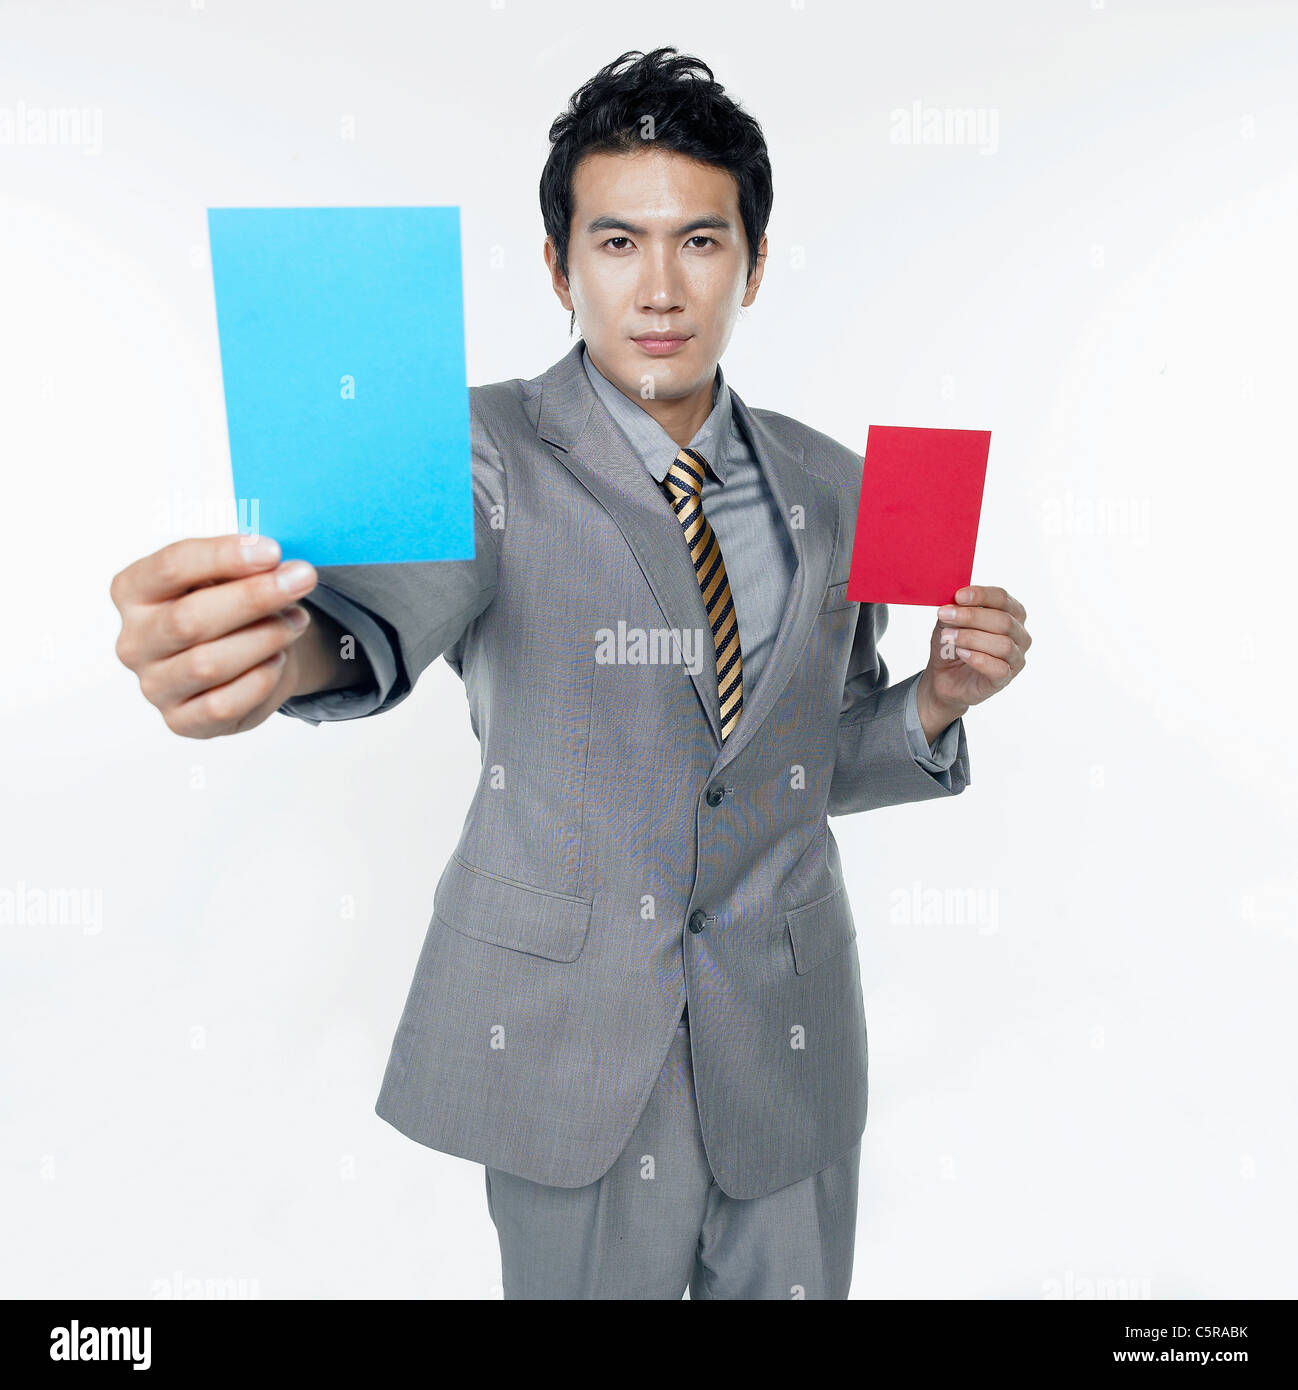 A man holding a red card and a blue card Stock Photo